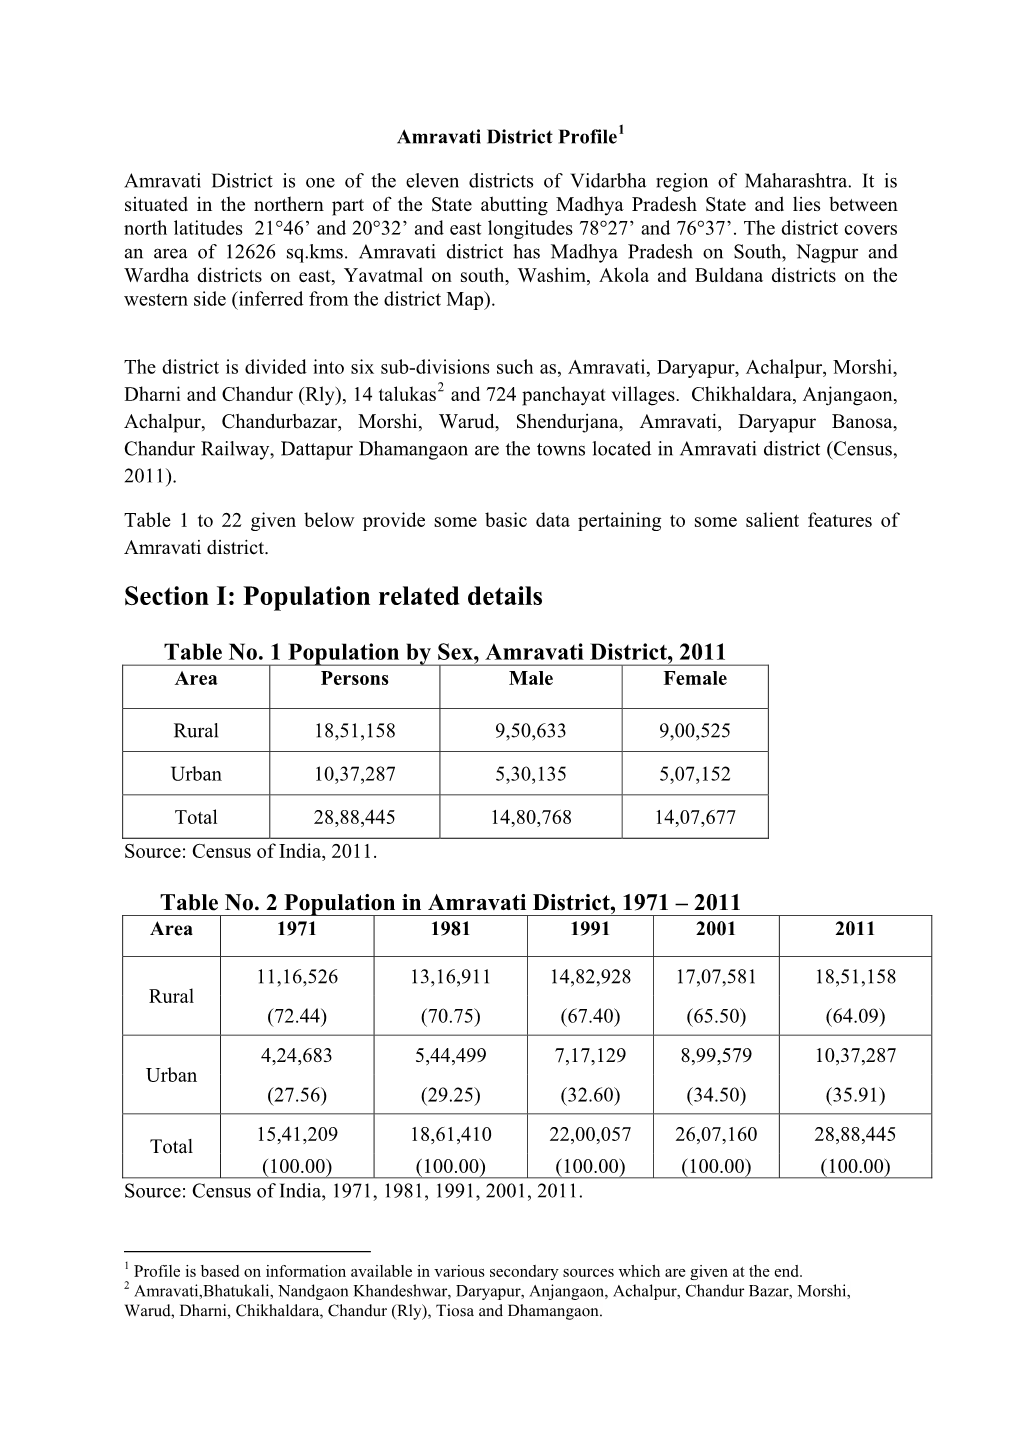 Section I: Population Related Details